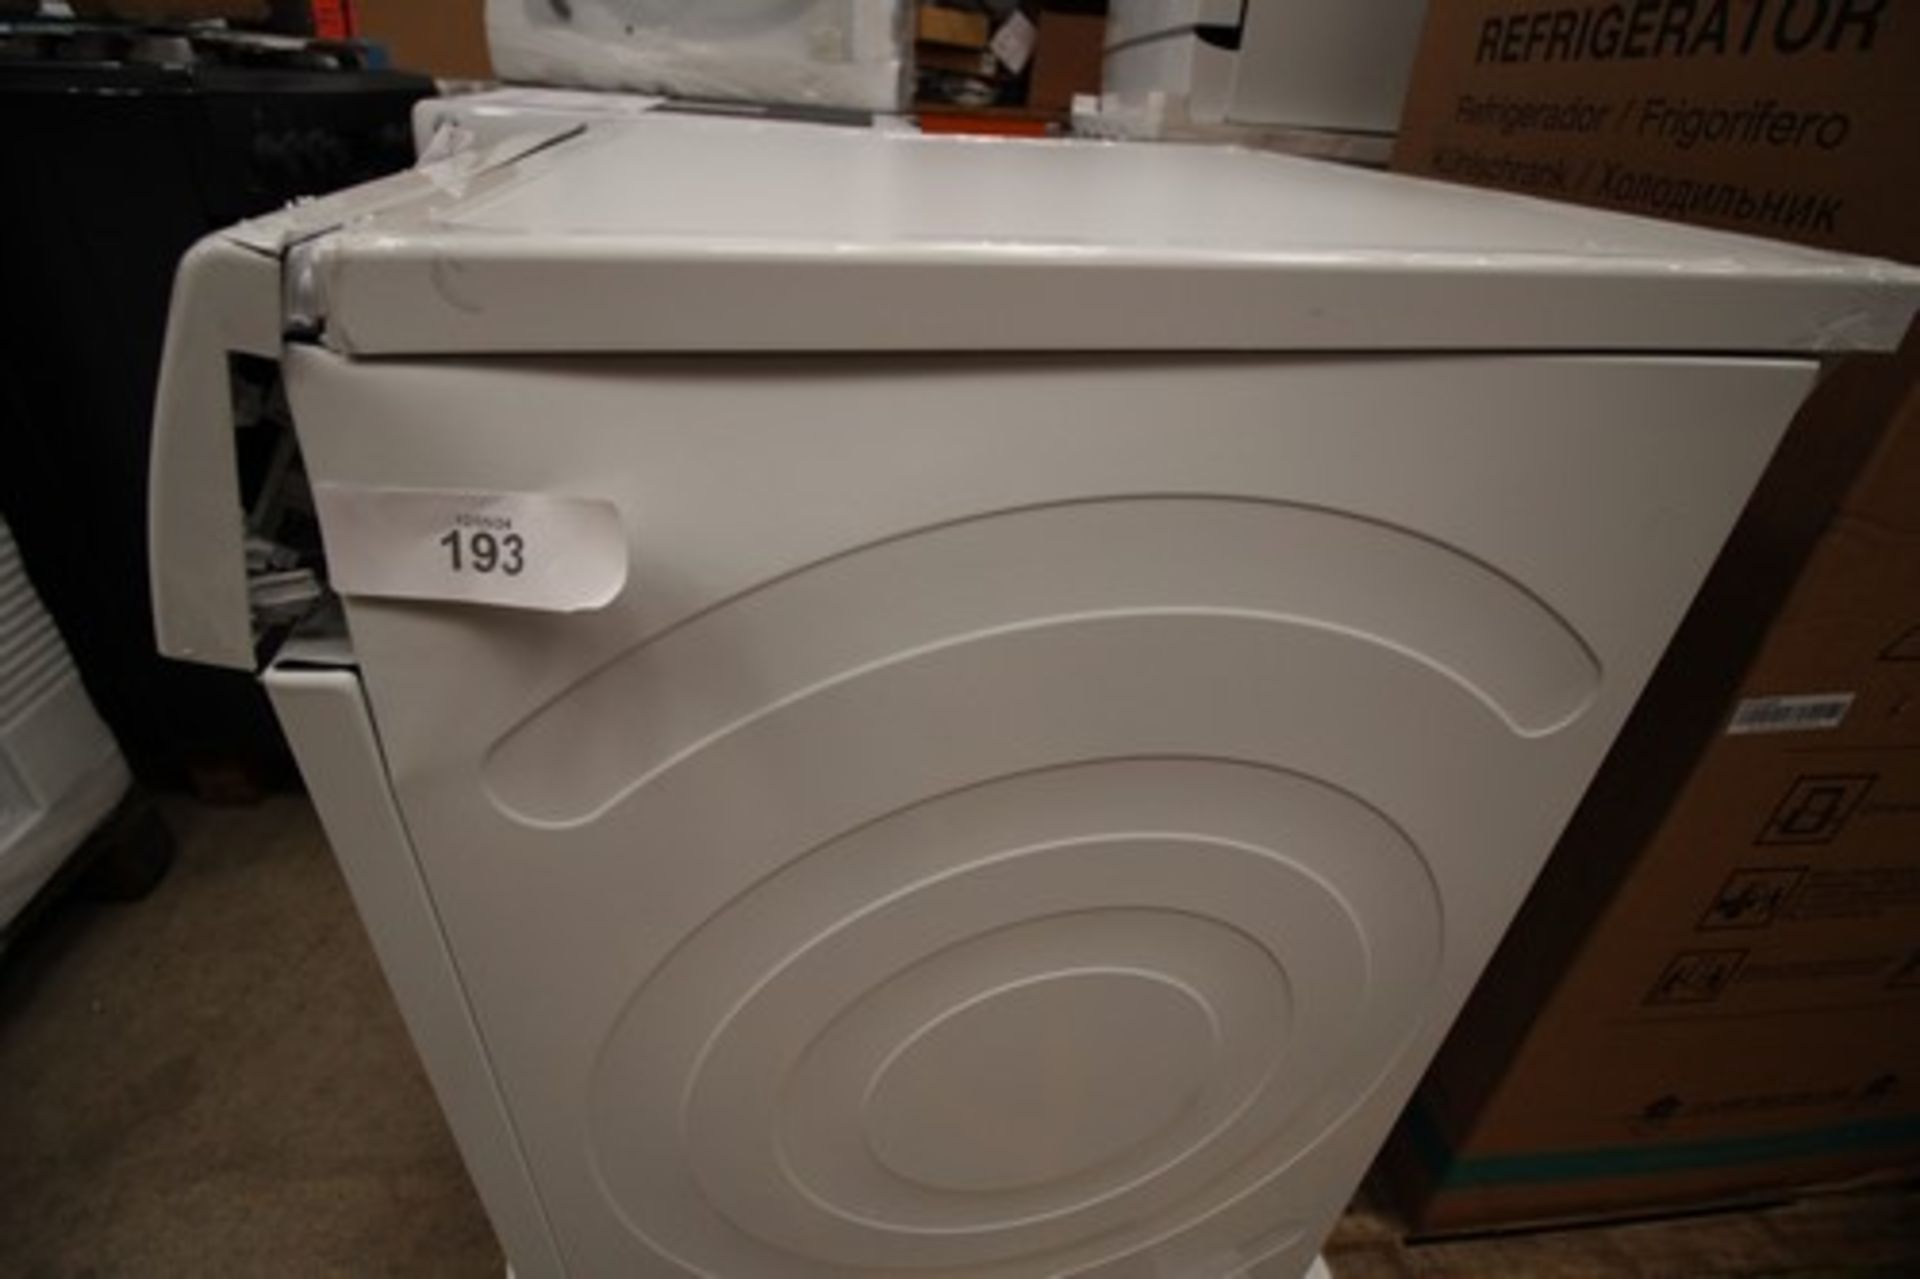 1 x Bosch Serie 4 tumble dryer machine, Model WTH84001GB, damaged control panel and top panel - - Image 2 of 3